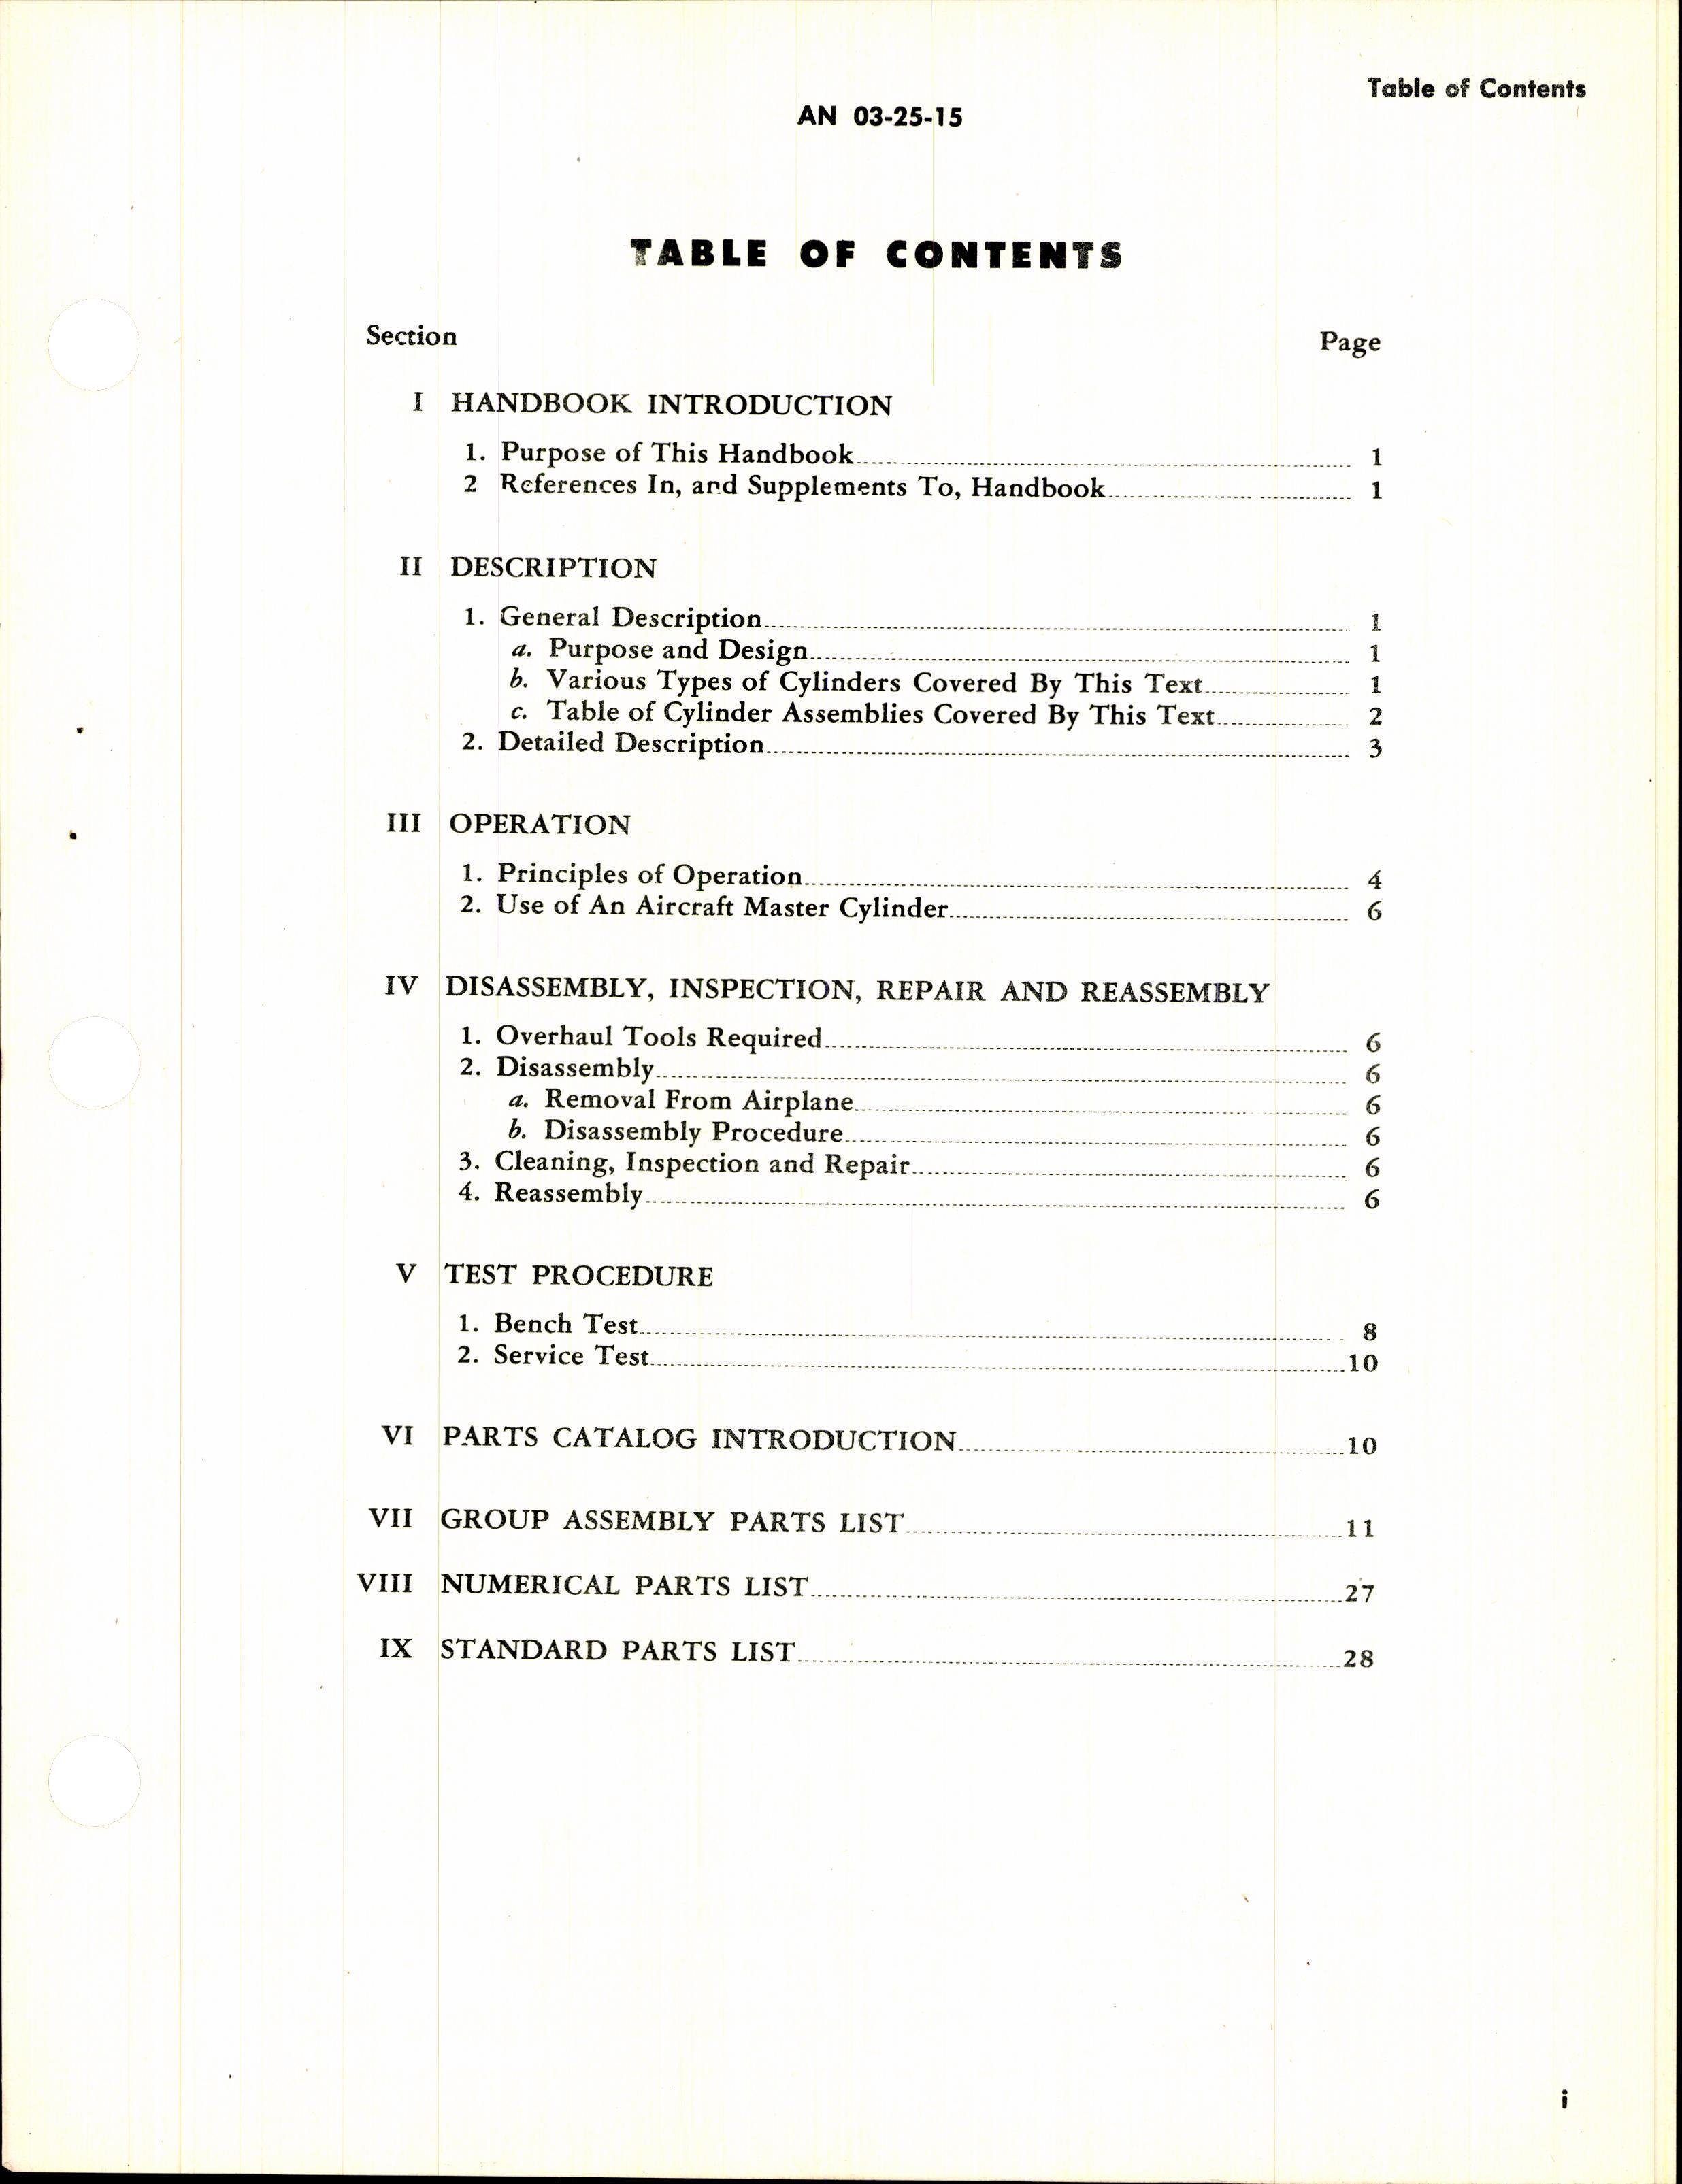 Sample page 3 from AirCorps Library document: Overhaul Instructions with Parts Catalog for Aircraft Master Cylinders